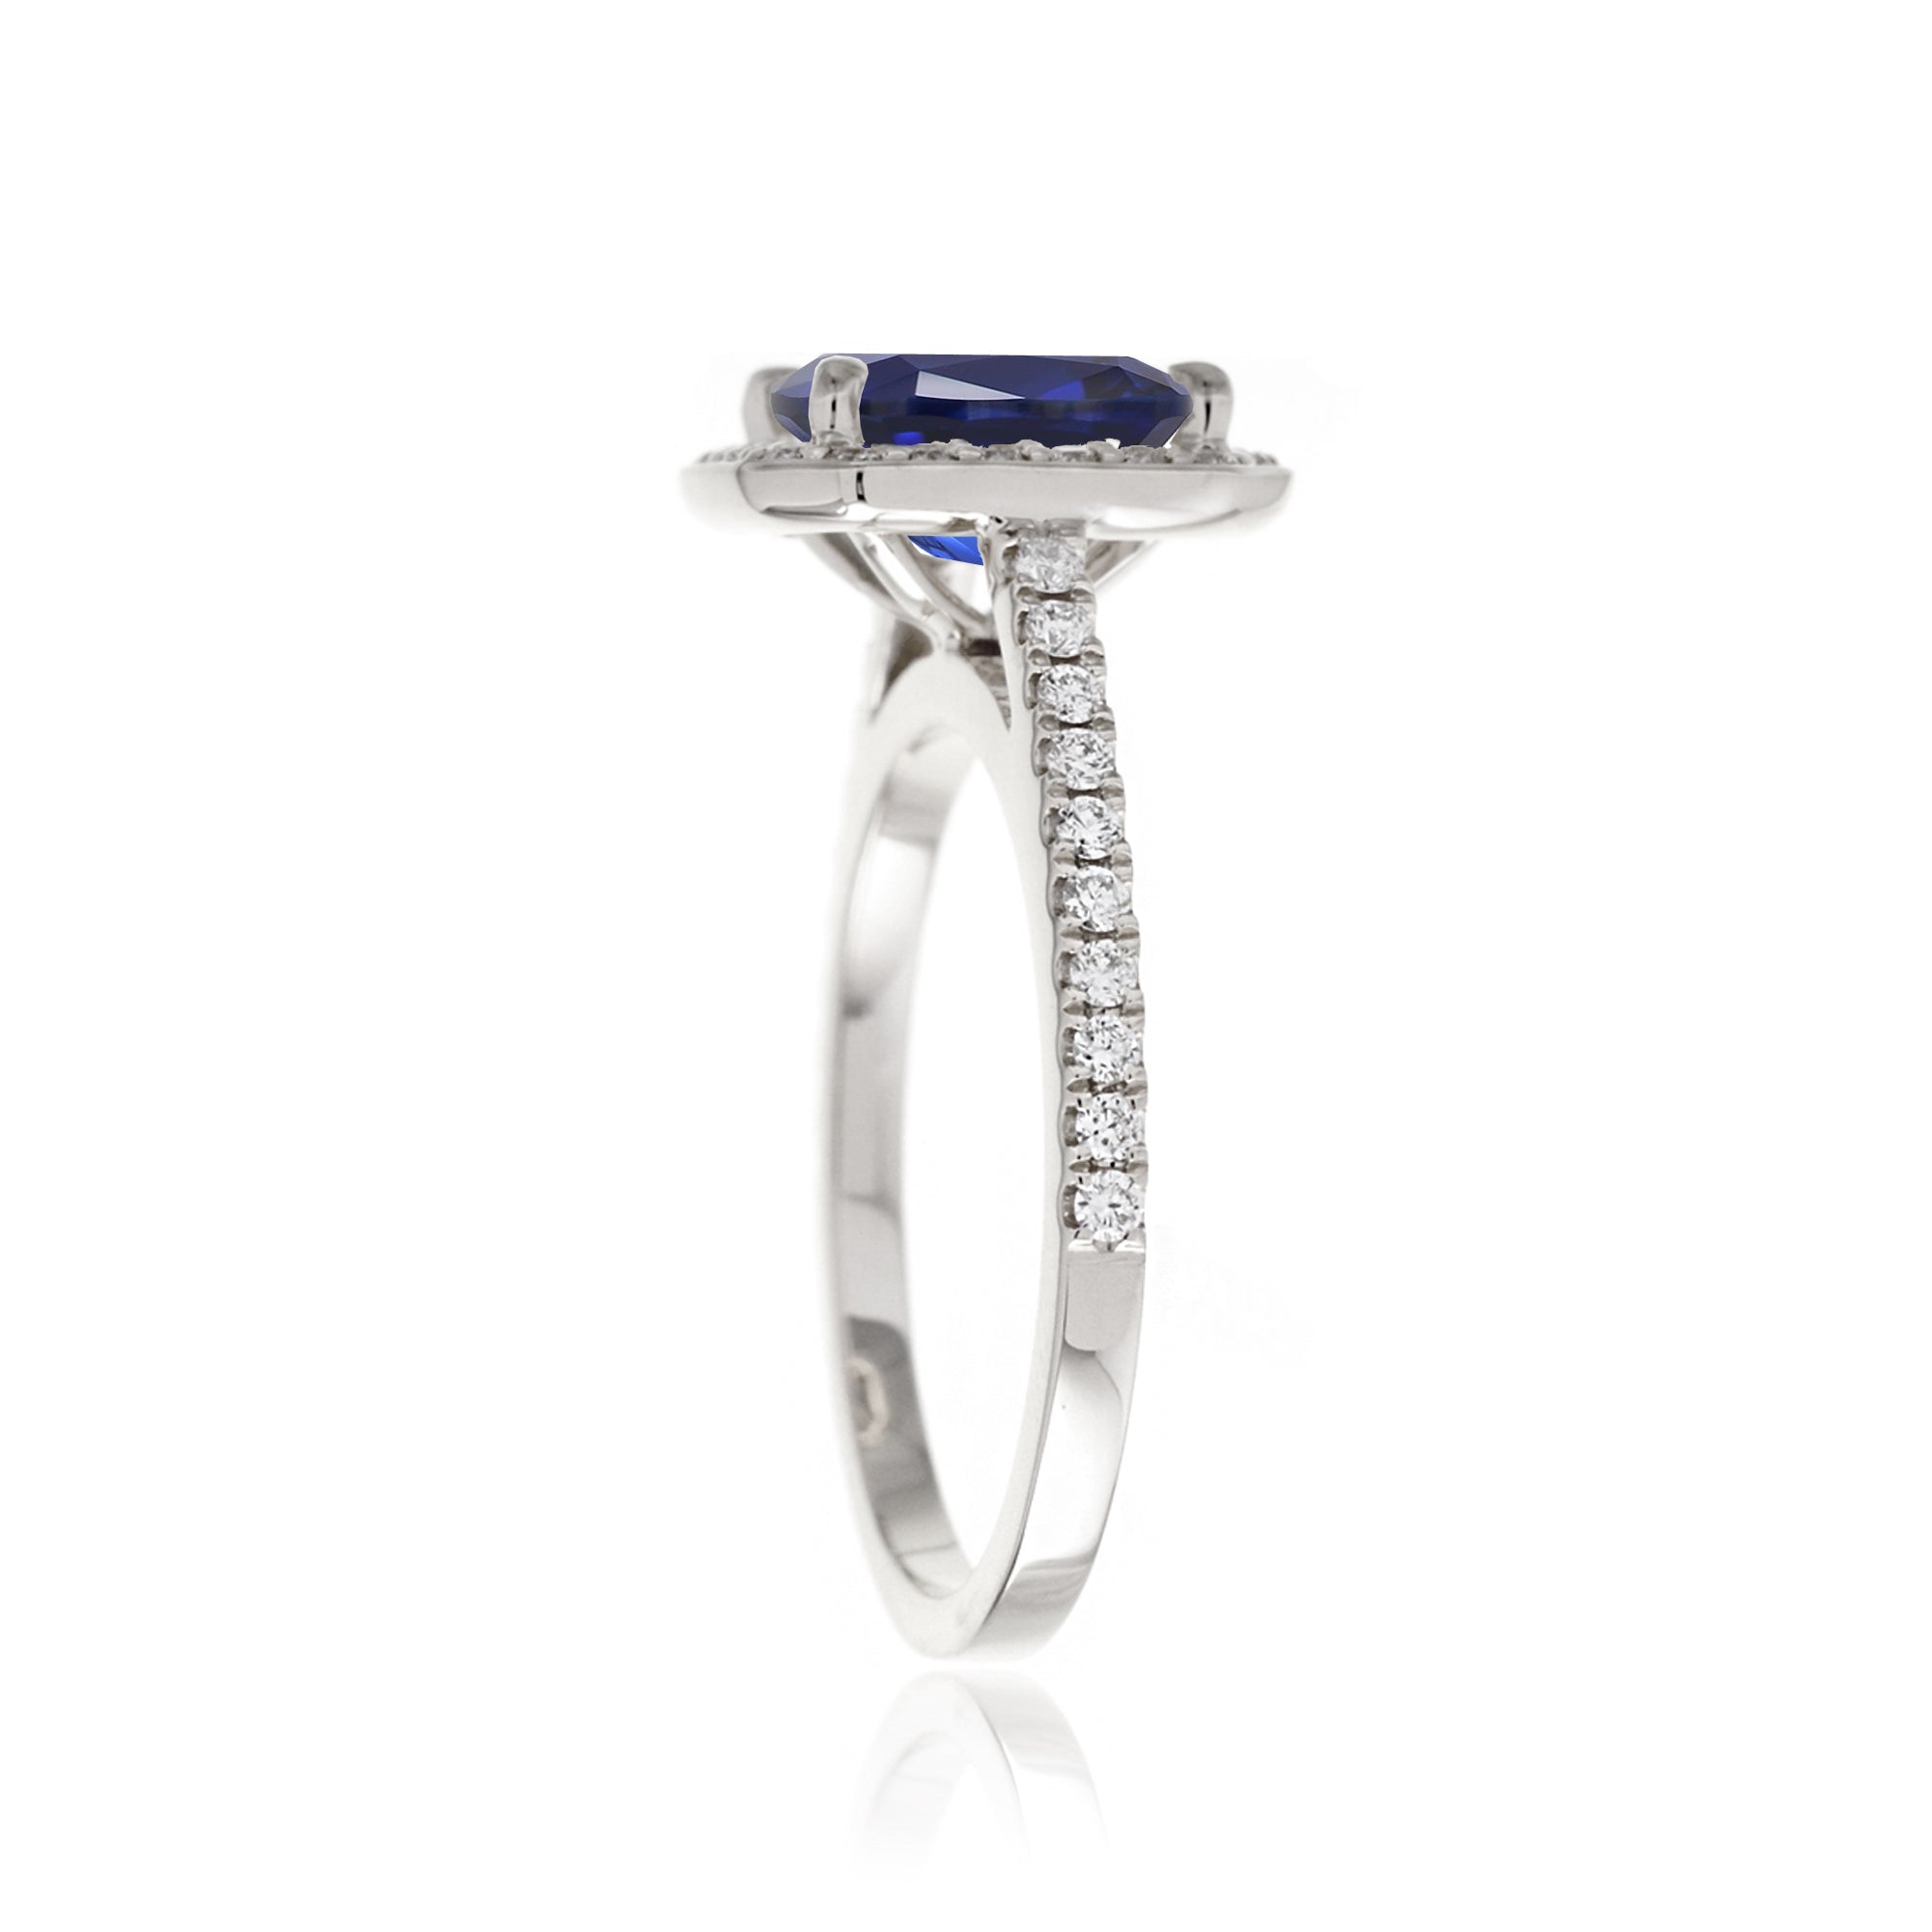 Cushion lab-grown sapphire diamond halo cathedral engagement ring - the Steffy white gold